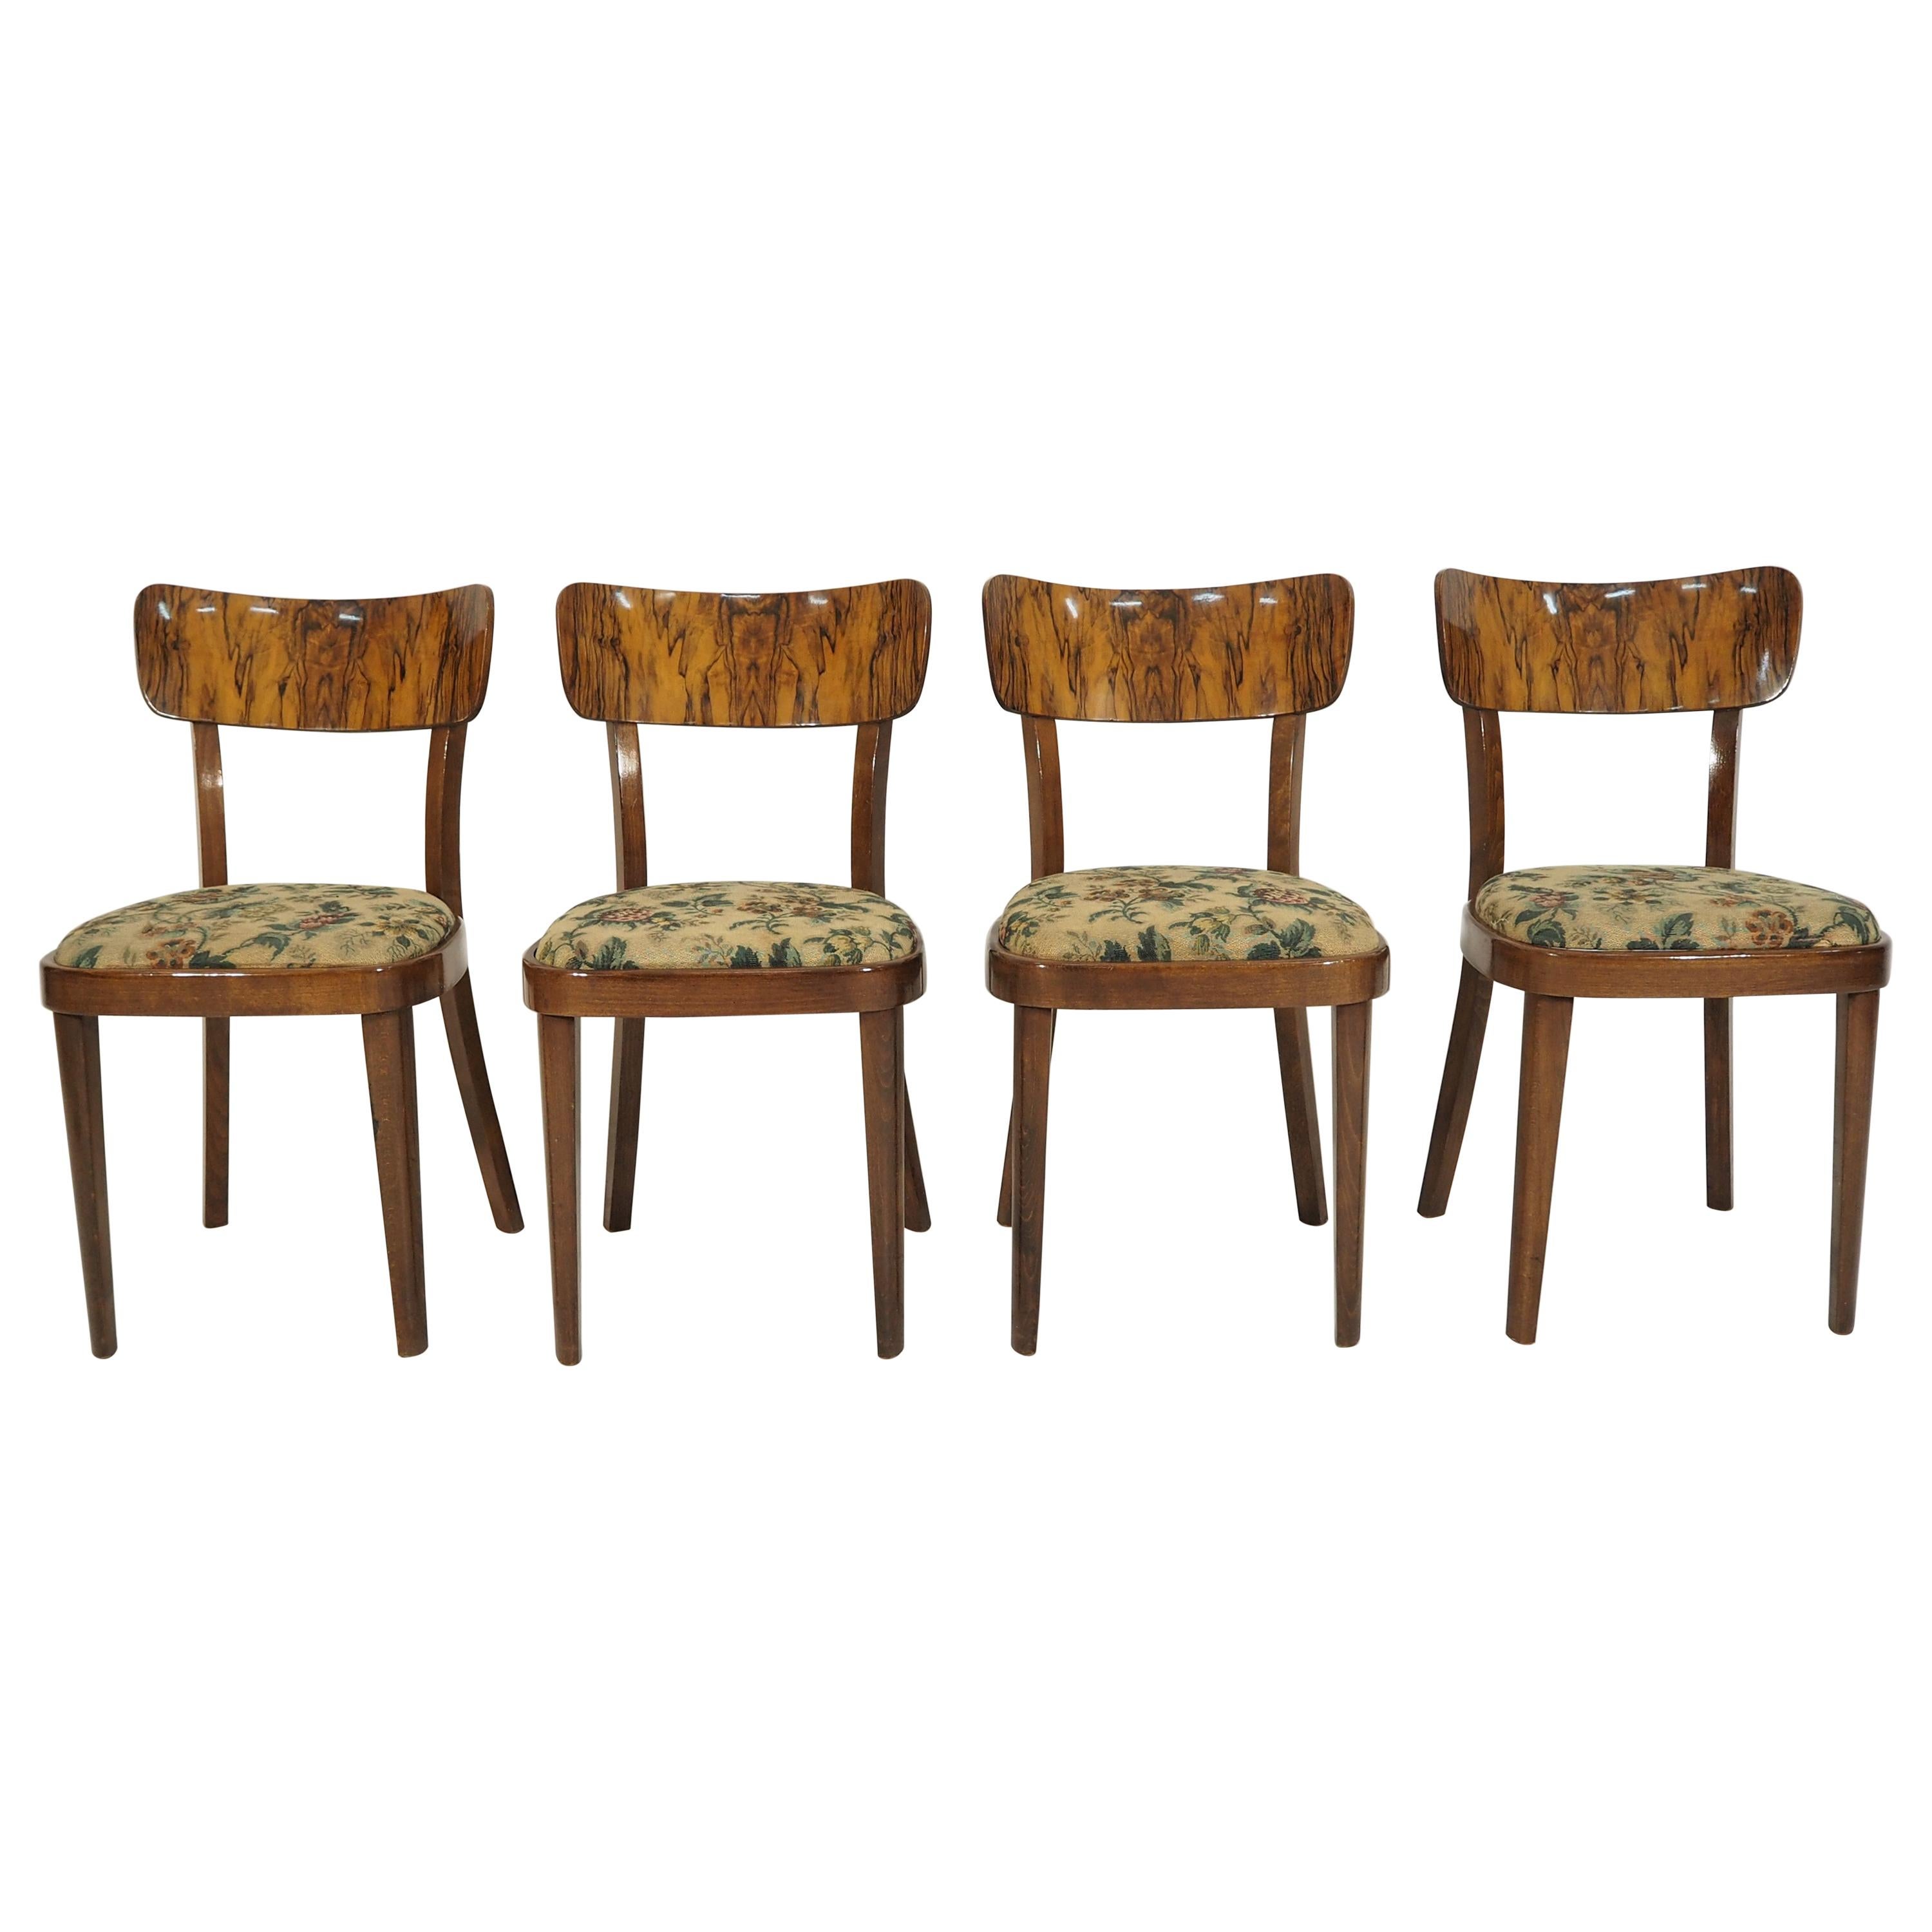 Vintage Art Deco Dining Chairs, circa 1960, Set of 4